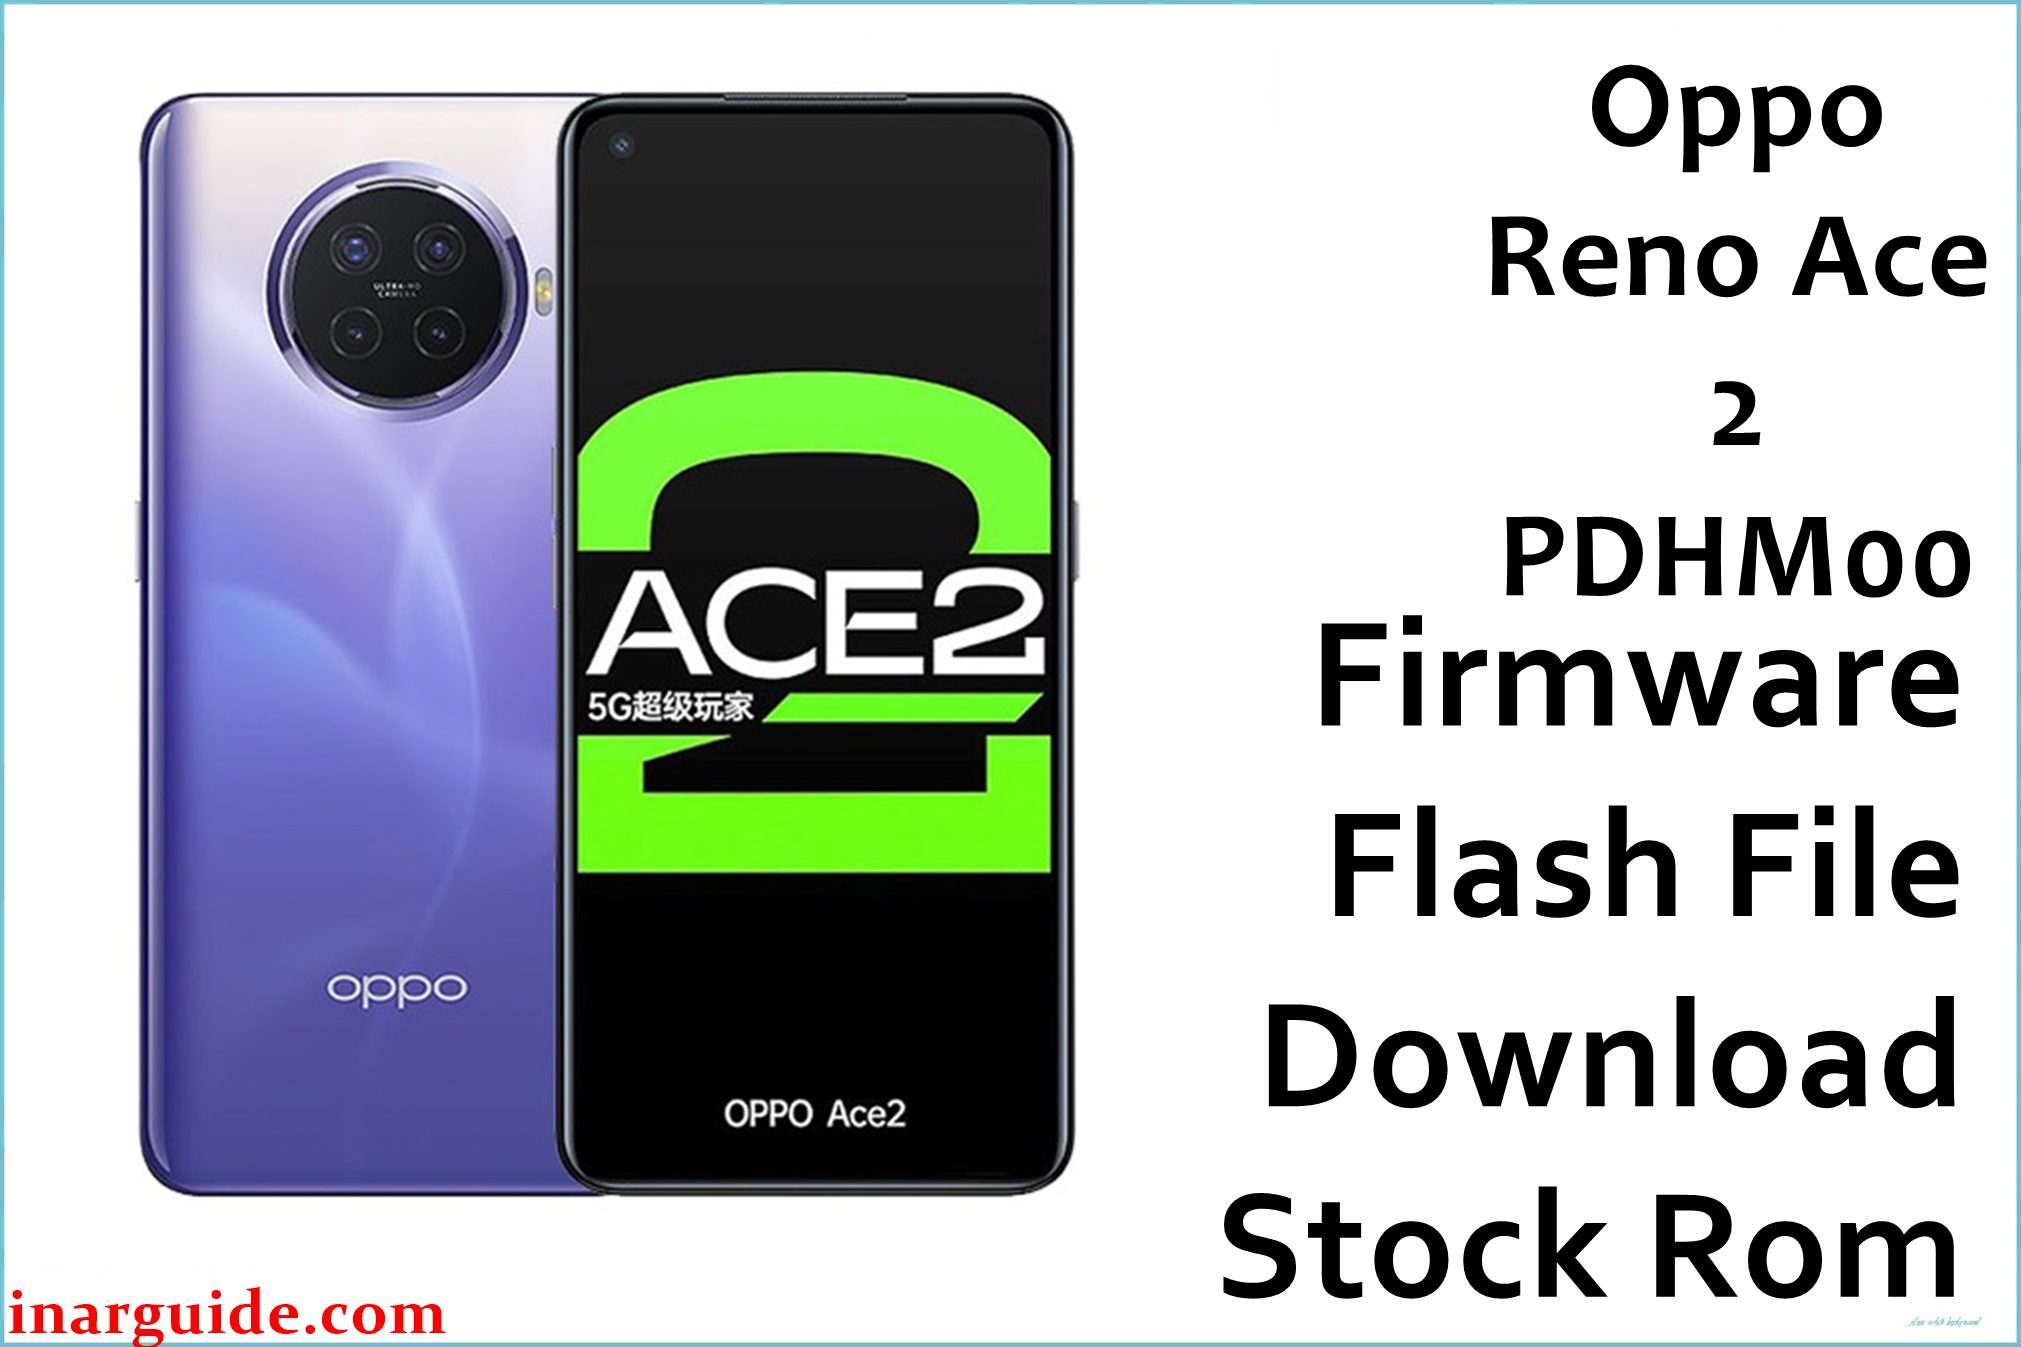 Oppo Reno Ace 2 PDHM00